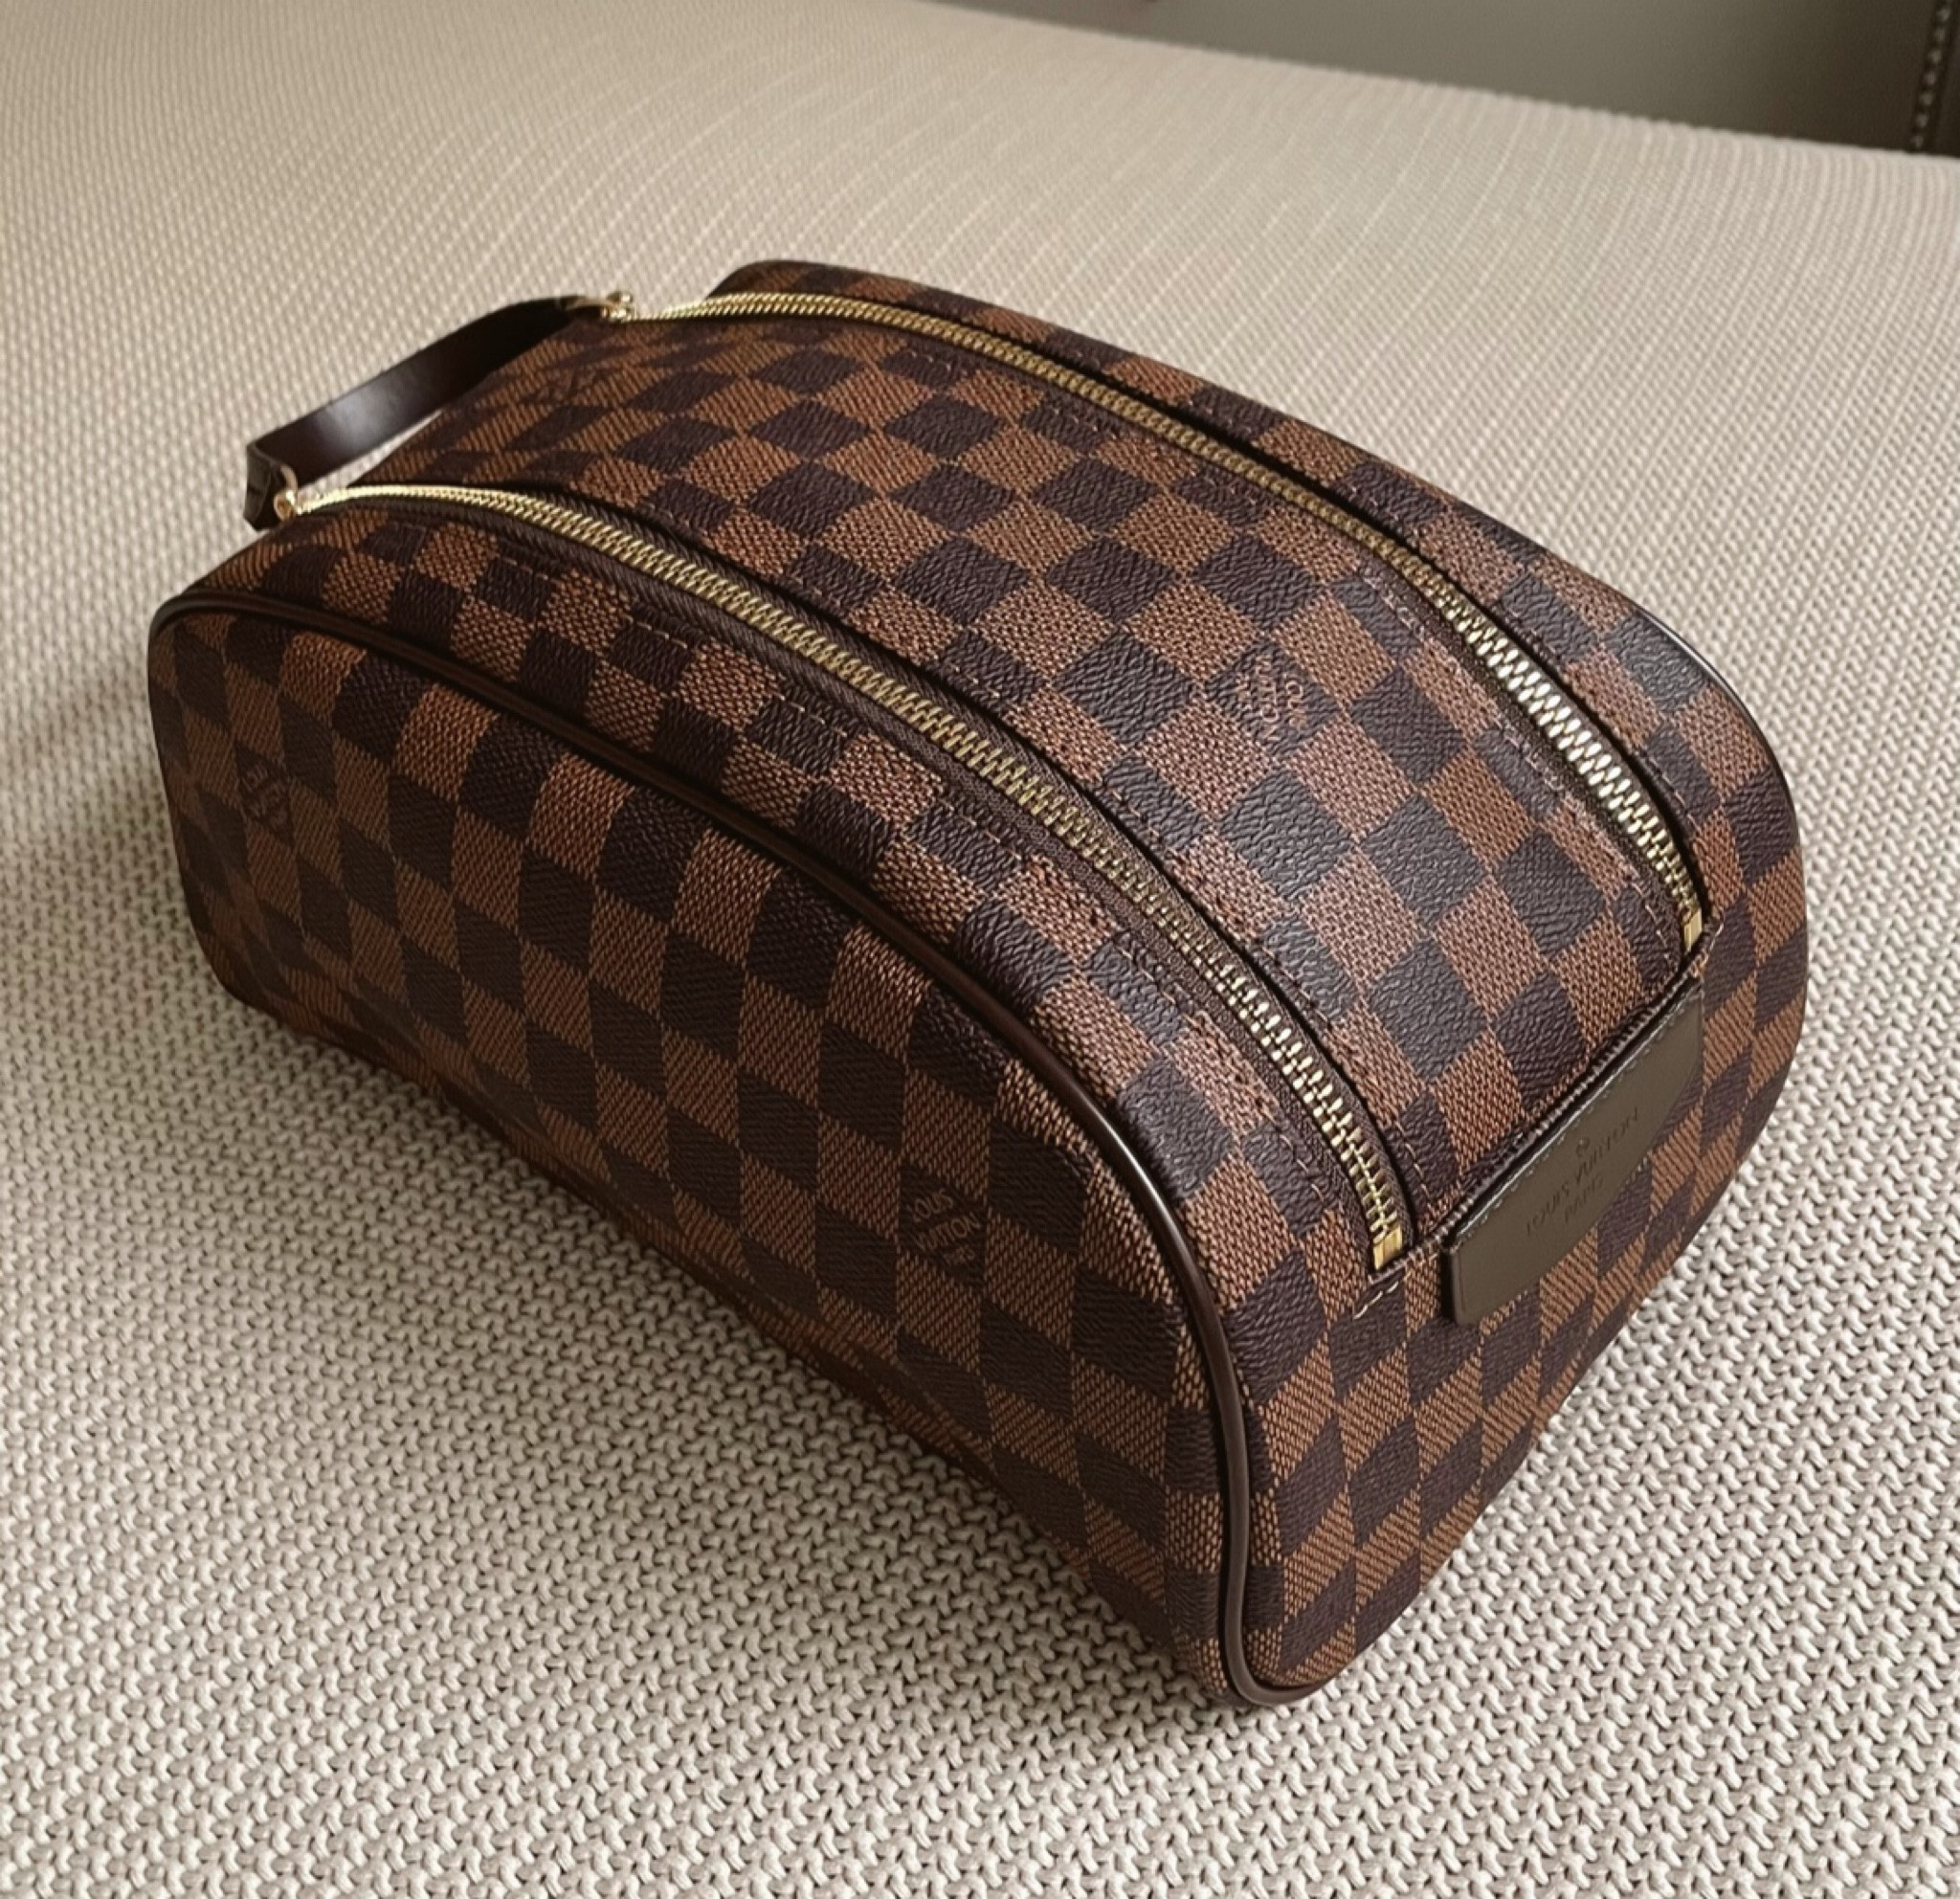 Part 1 Louis Vuitton bag from the gate #dhgate #dhgateunboxing